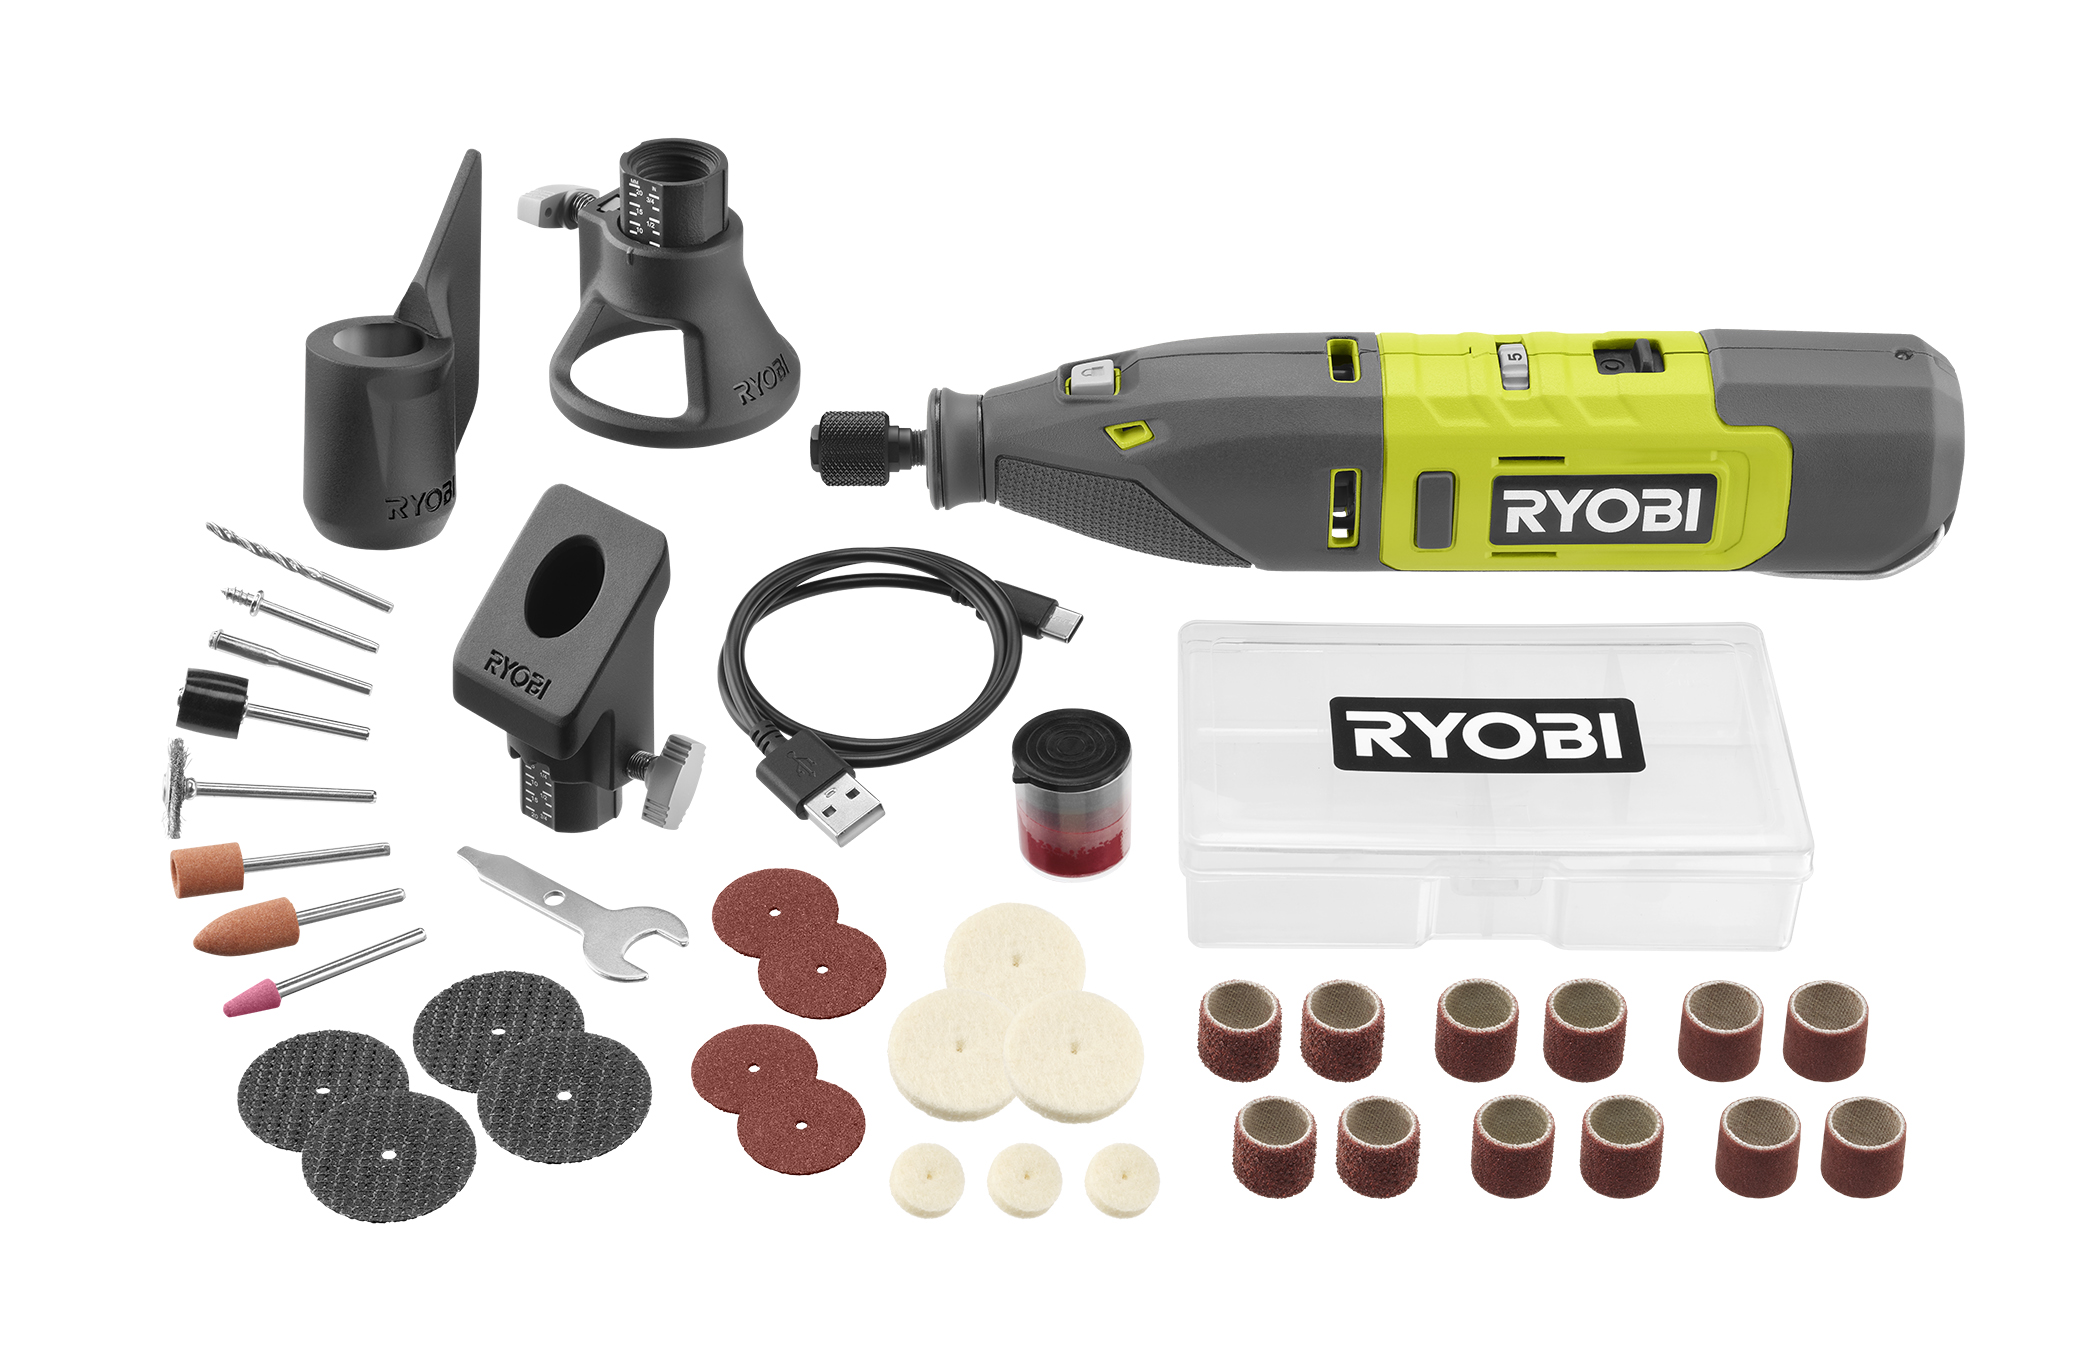 18-Volt One+ Cordless Rotary Tool with Accessories, Size: 36 in